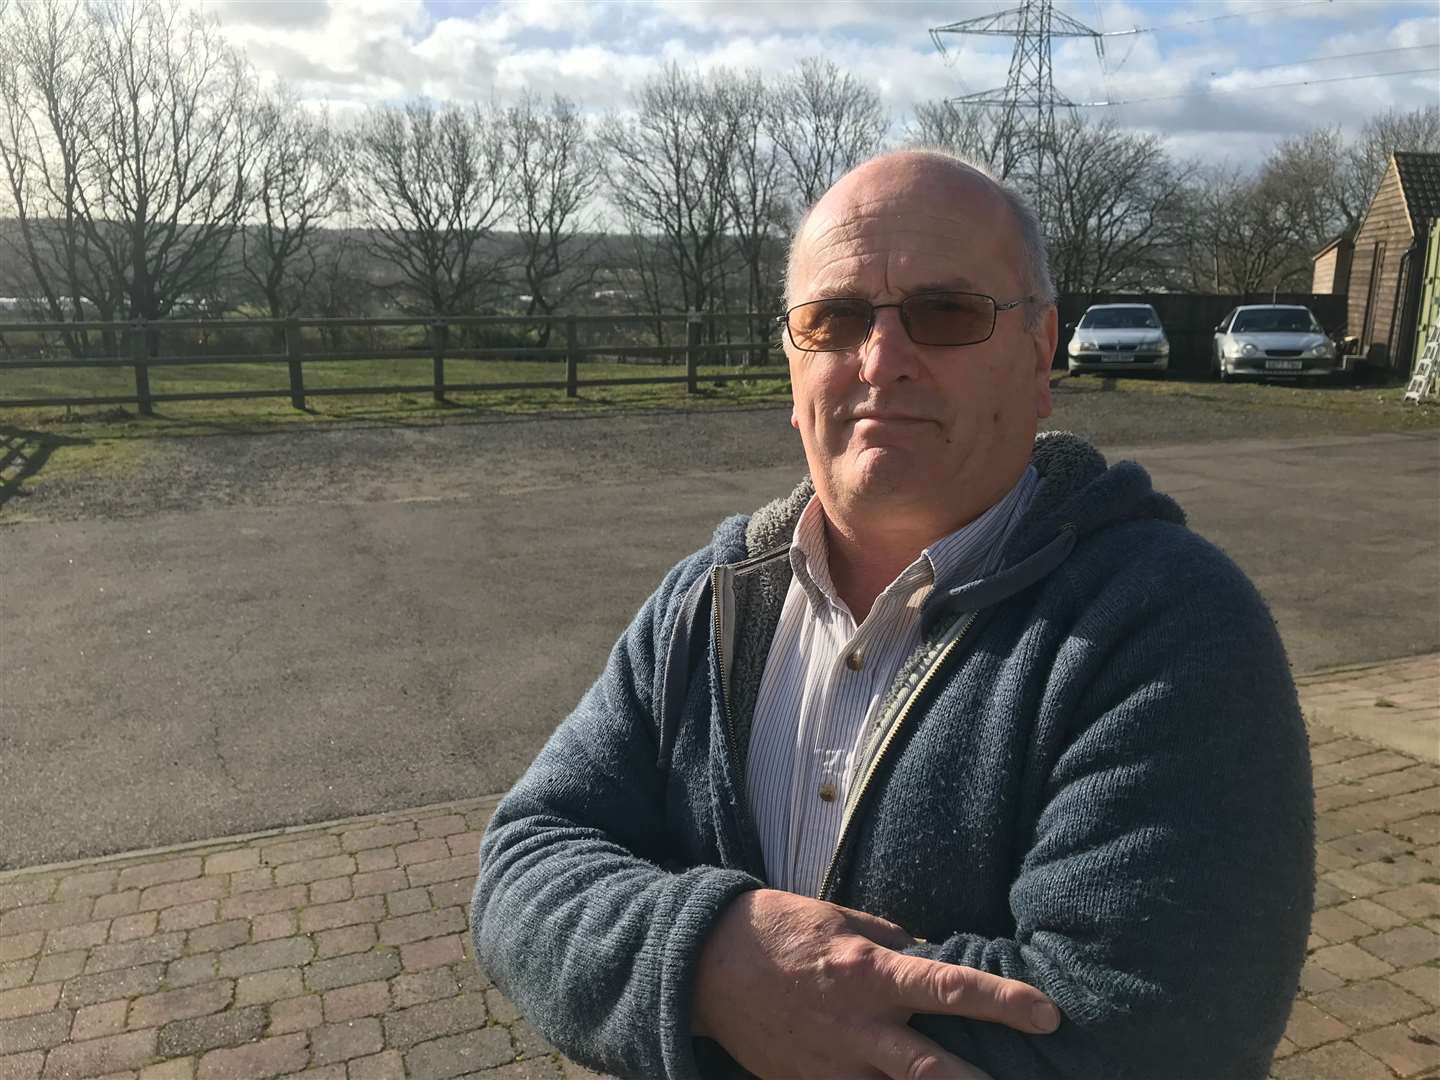 Ivor Herdson, who lives off Shalloak Road, is angry with the closure of the route